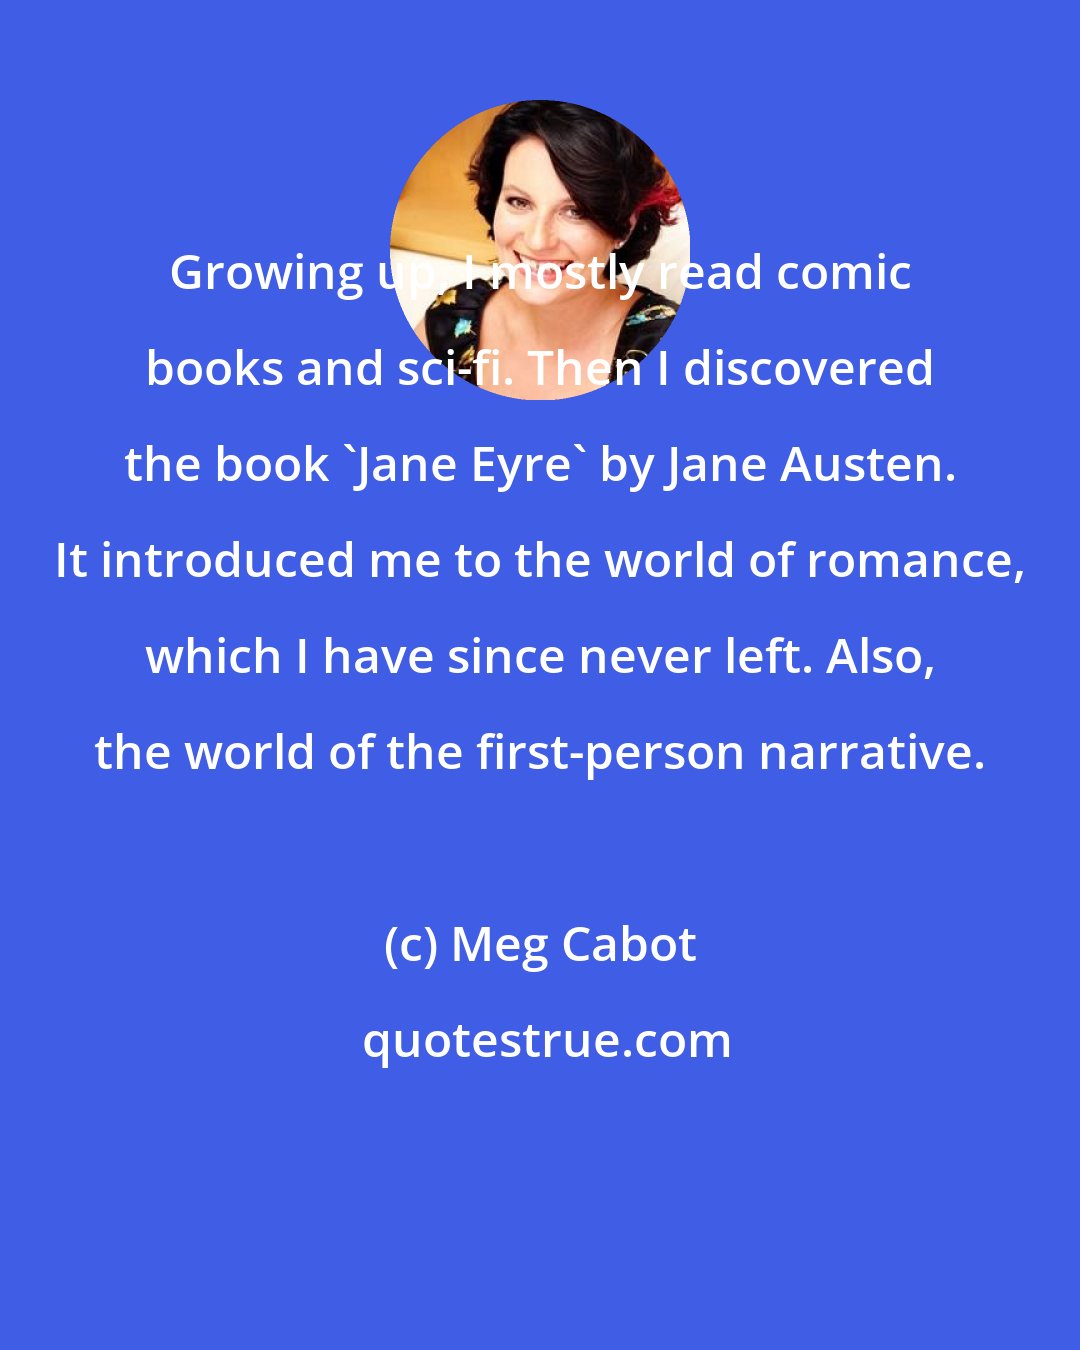 Meg Cabot: Growing up, I mostly read comic books and sci-fi. Then I discovered the book 'Jane Eyre' by Jane Austen. It introduced me to the world of romance, which I have since never left. Also, the world of the first-person narrative.